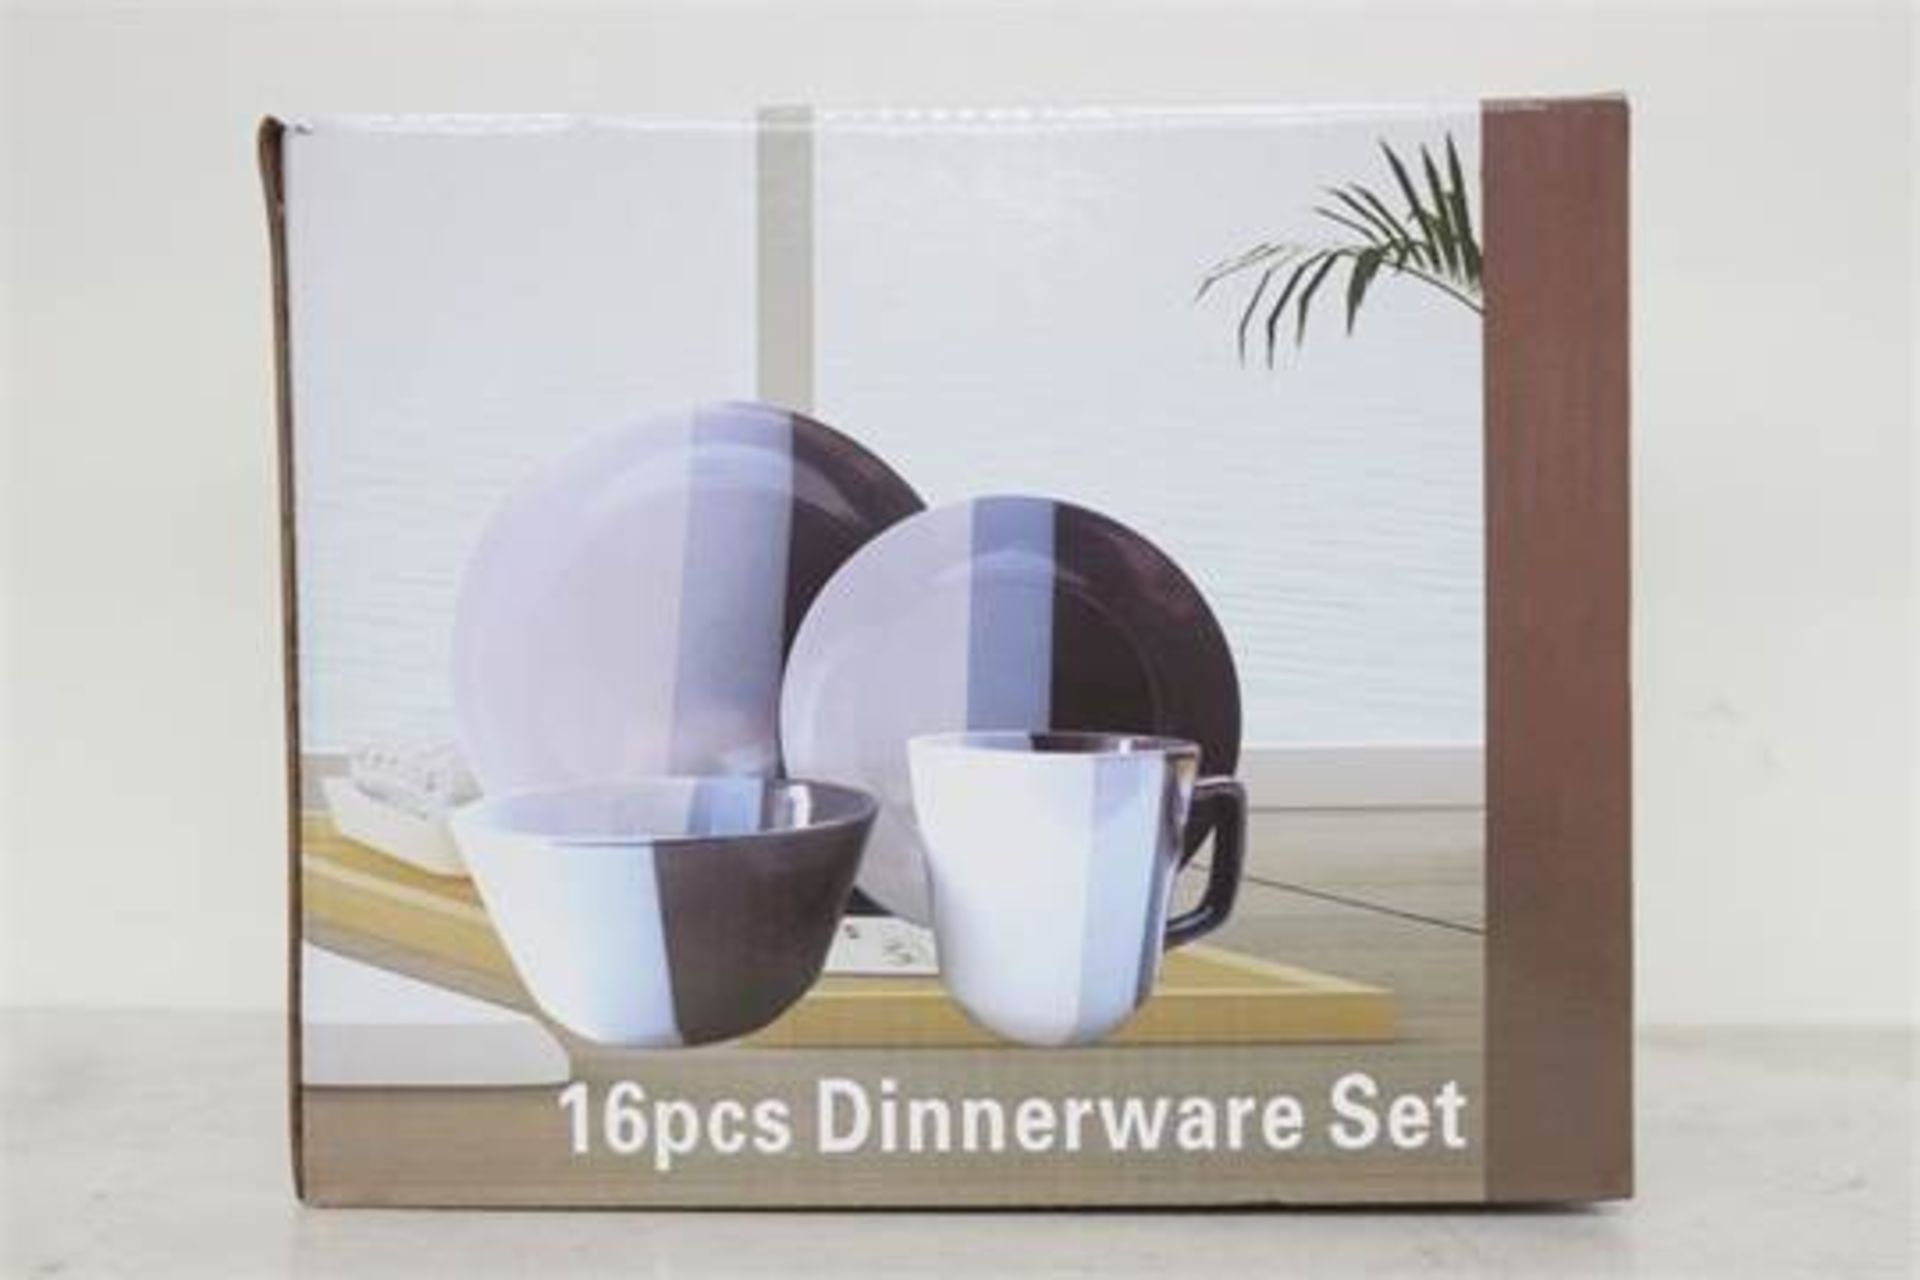 2X BOXED UNUSED 16 PIECE STONE WARE DINNER SETS (TLH-DINNER)